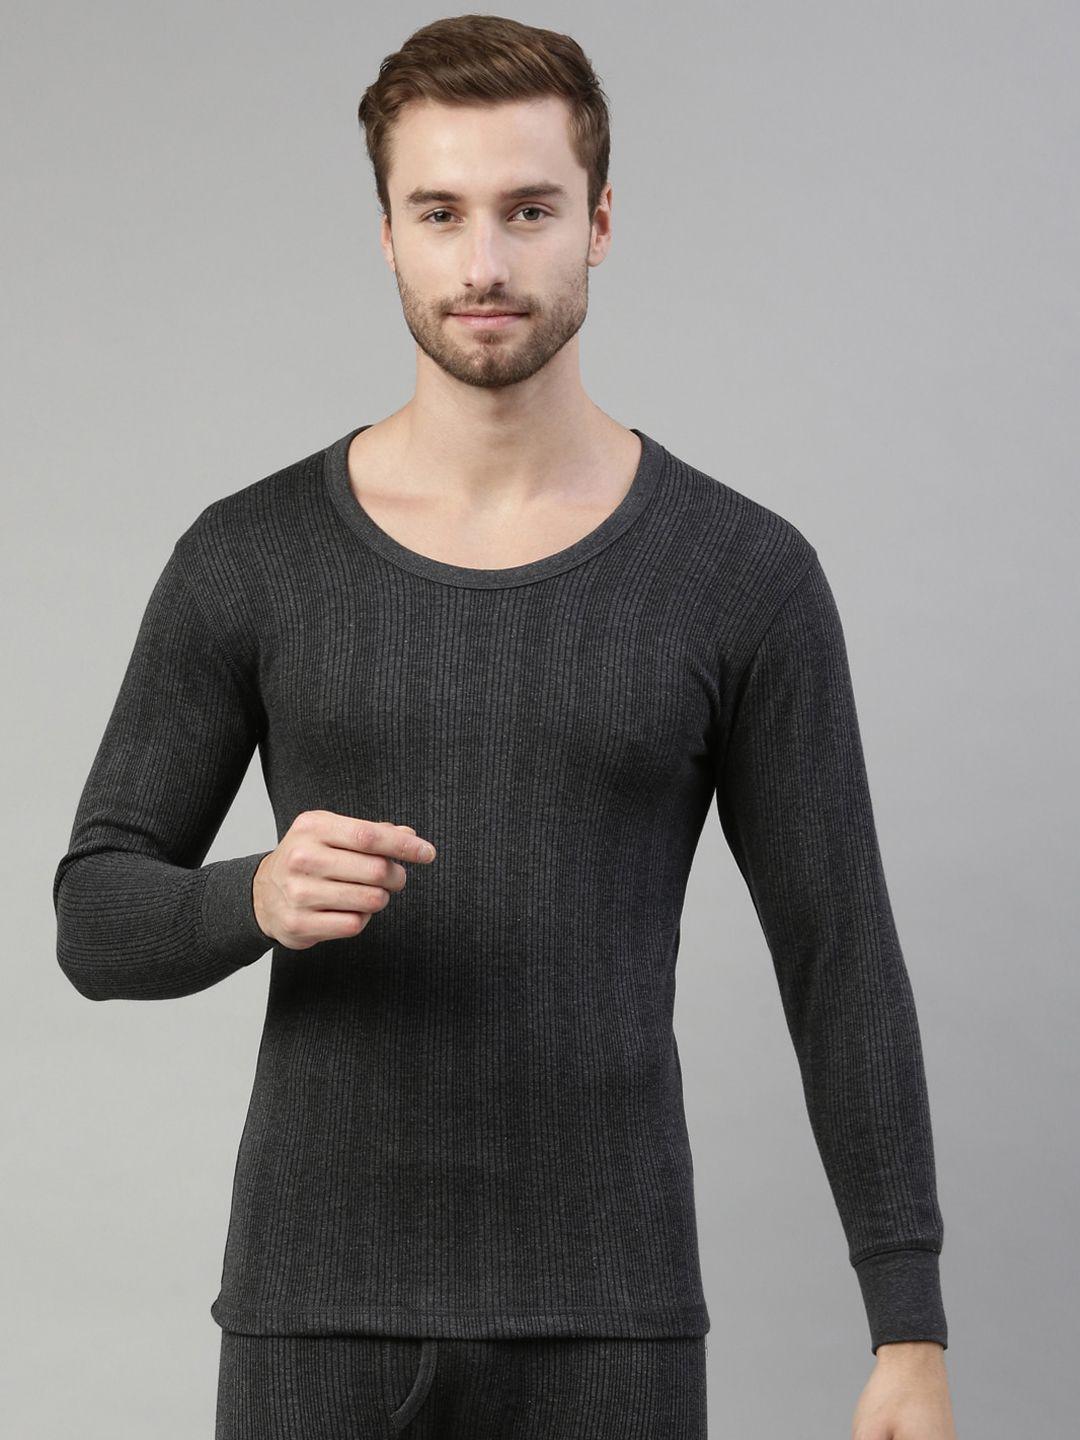 dixcy scott originals  4-way stretch ribbed thermal tops